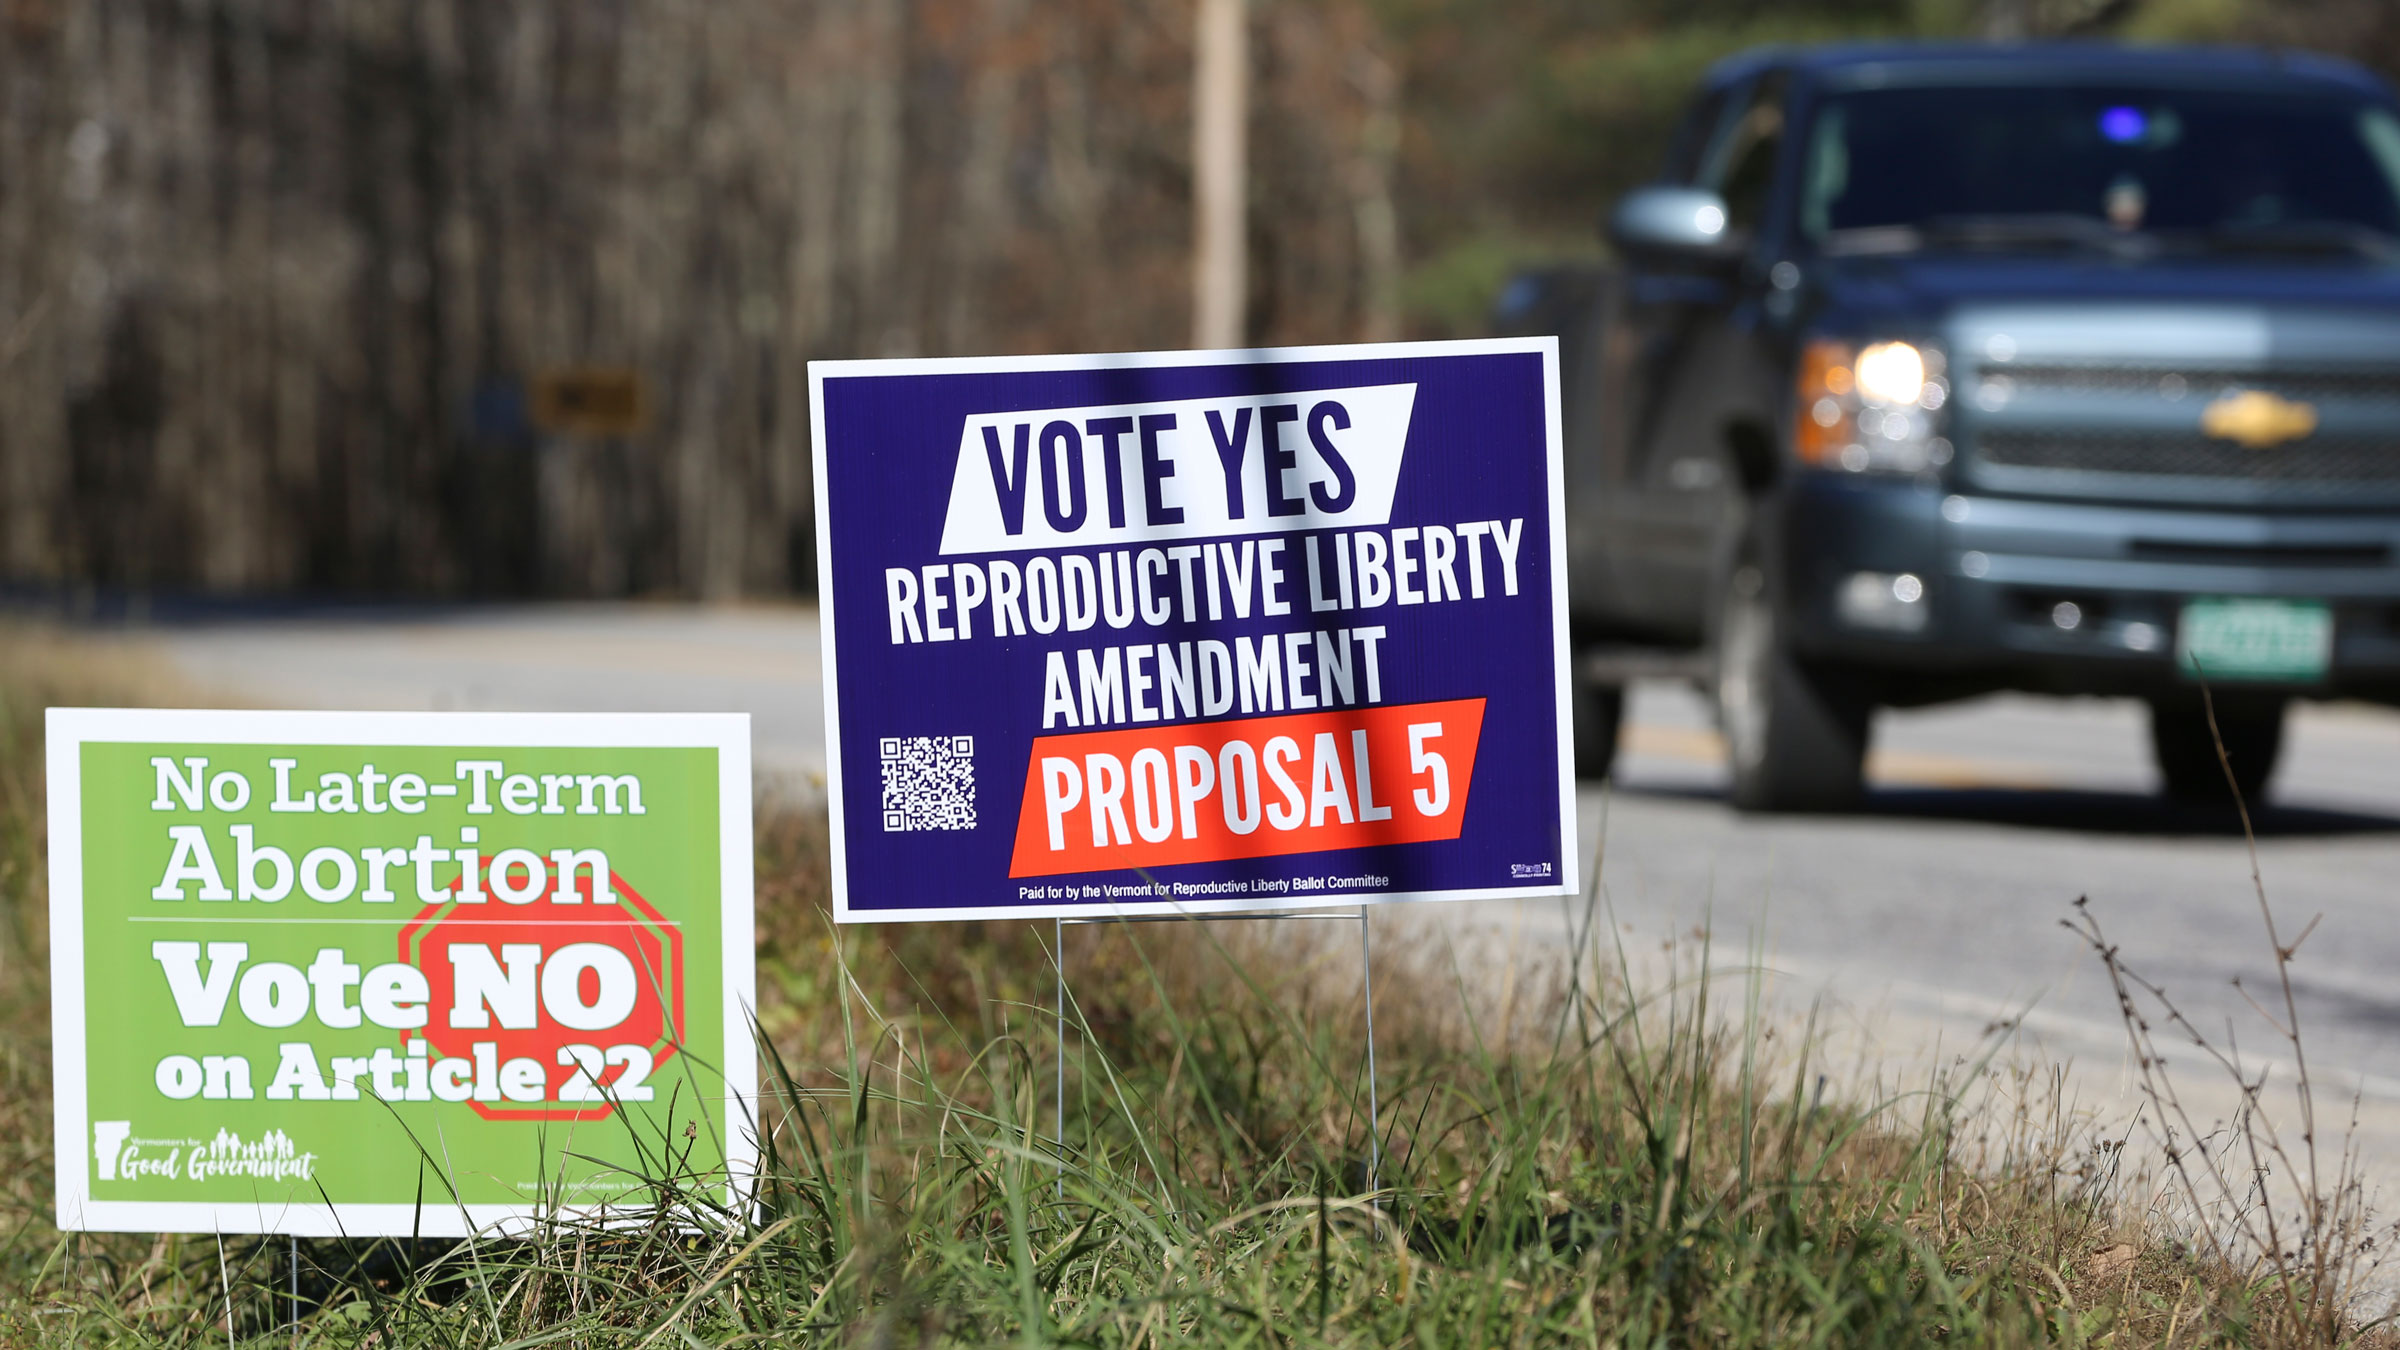 A truck in Middlesex, Vermont. drives by campaign signs opposing and supporting the proposed amendment to the Vermont constitution that would guarantee access to reproductive rights.